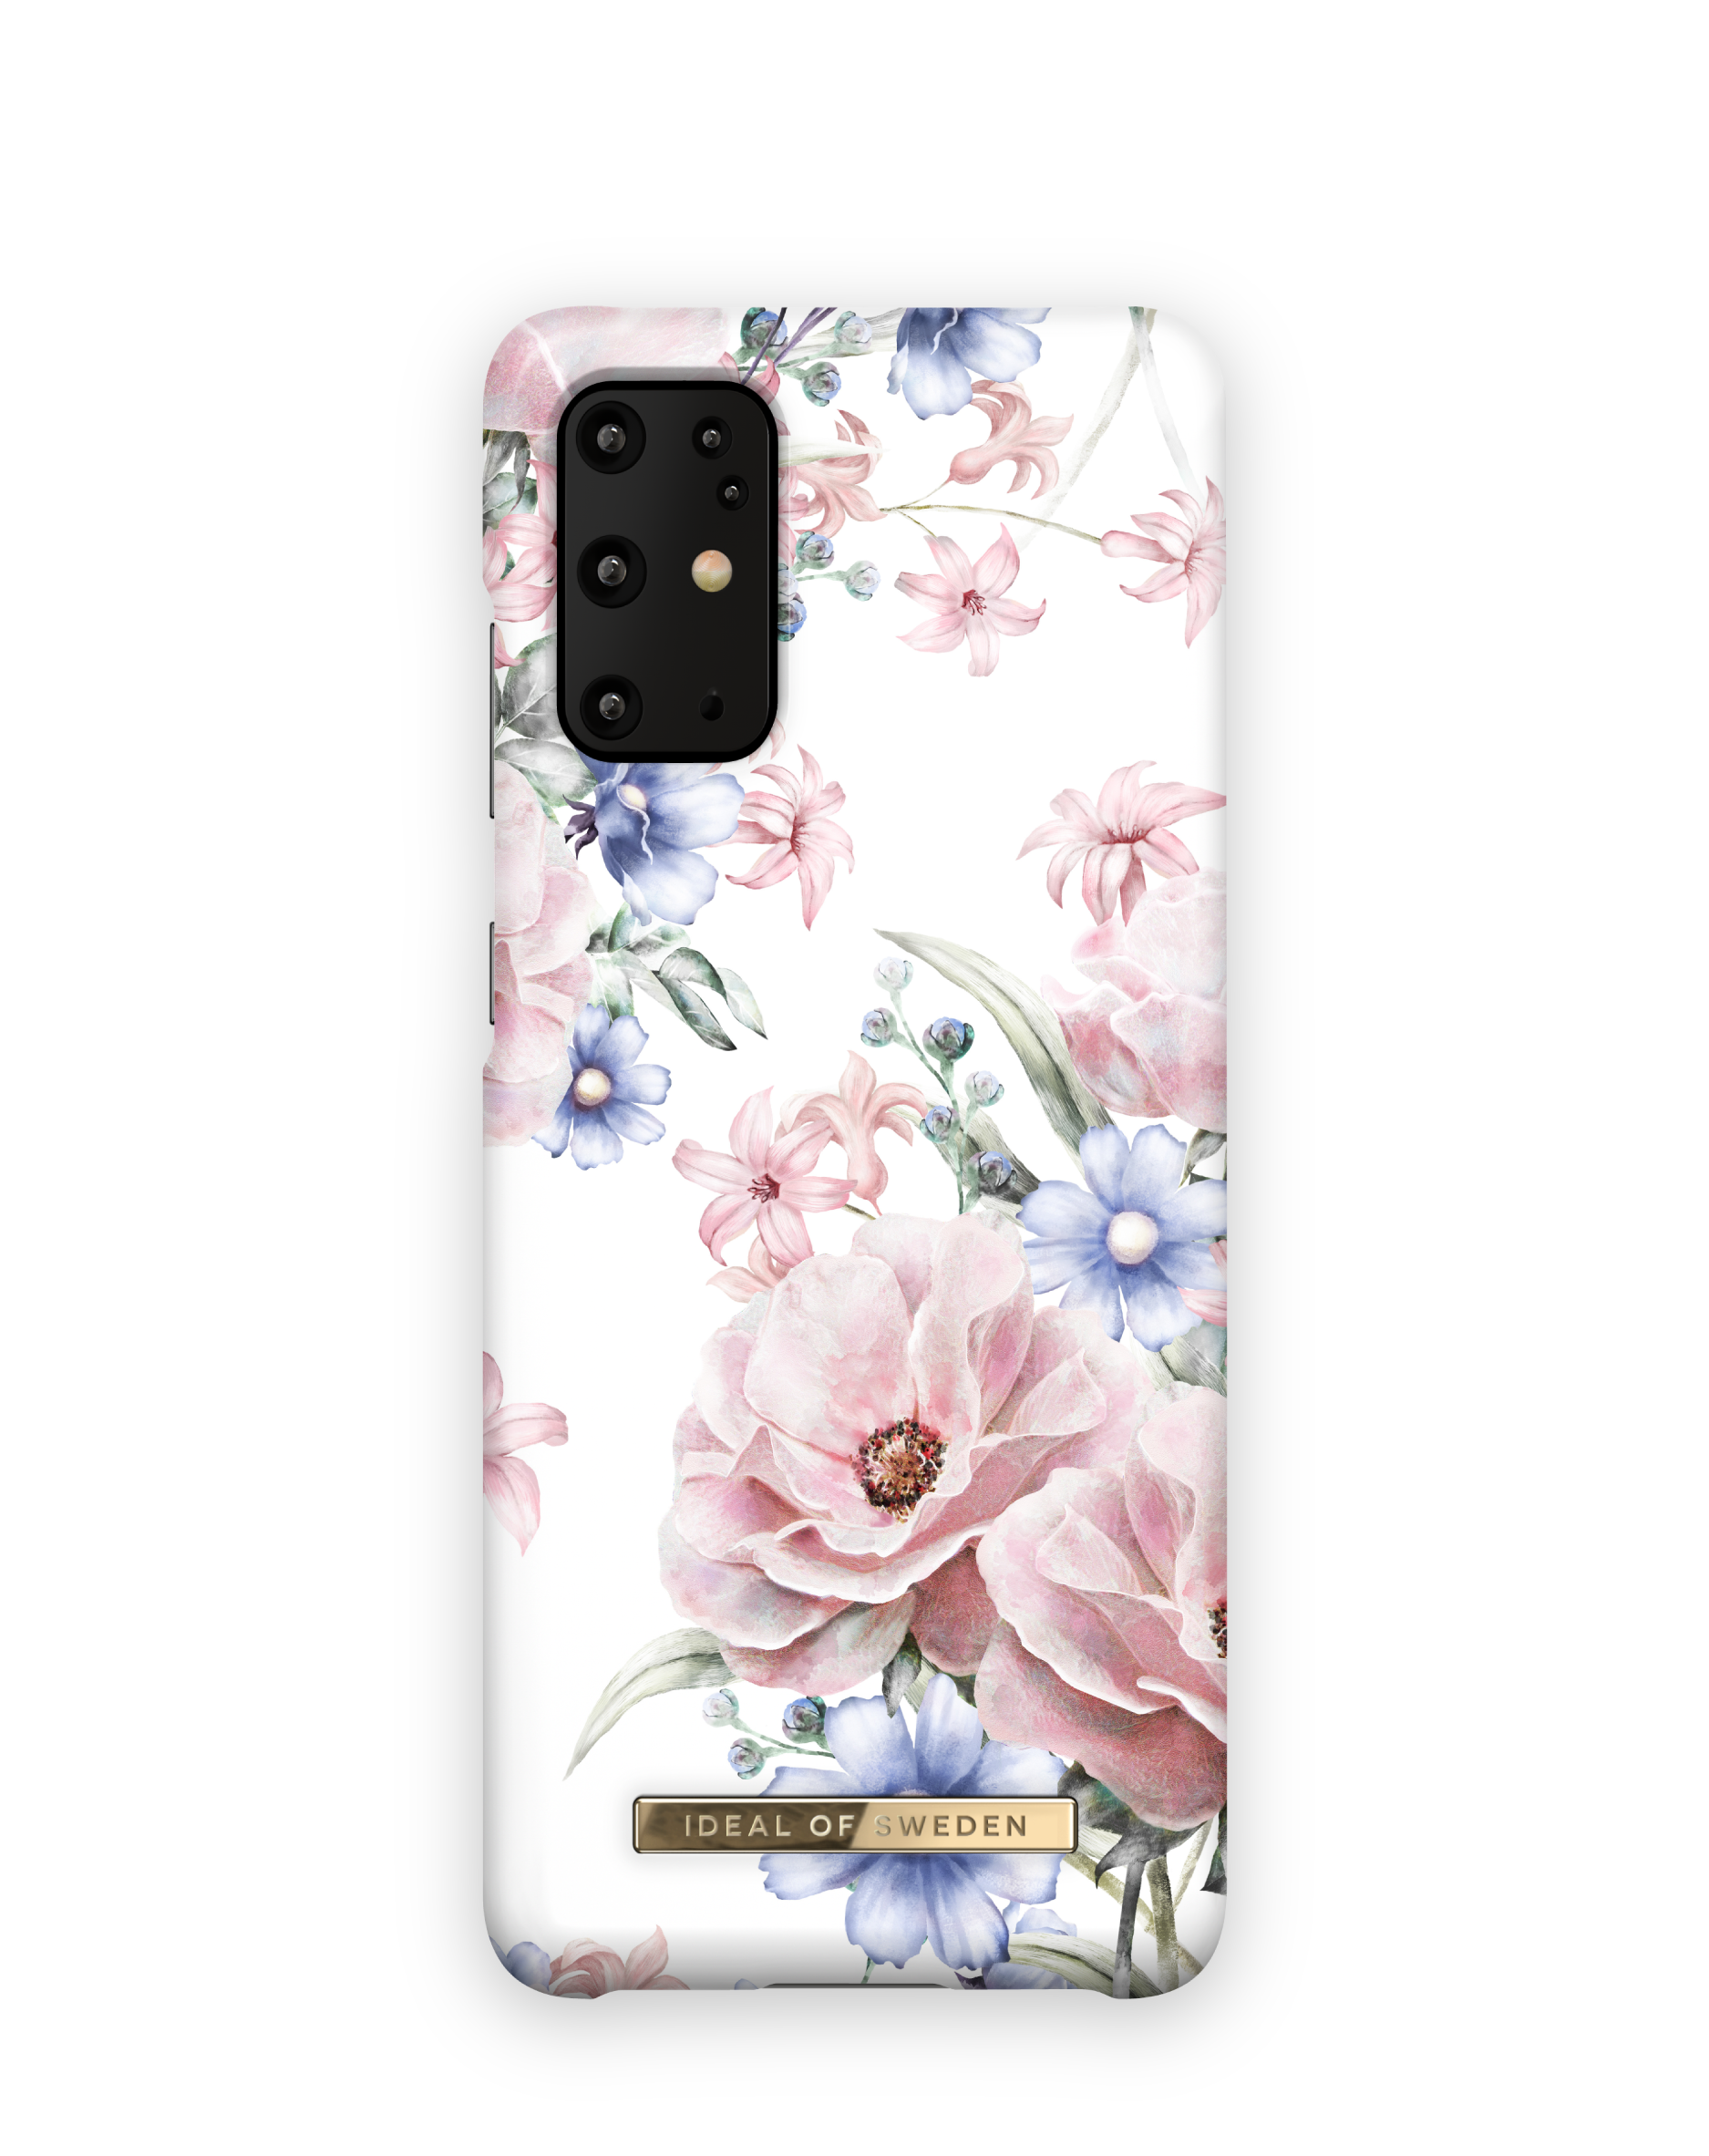 IDFCS17-S11-58, S20+, Samsung, Galaxy Romance OF SWEDEN Backcover, IDEAL Floral